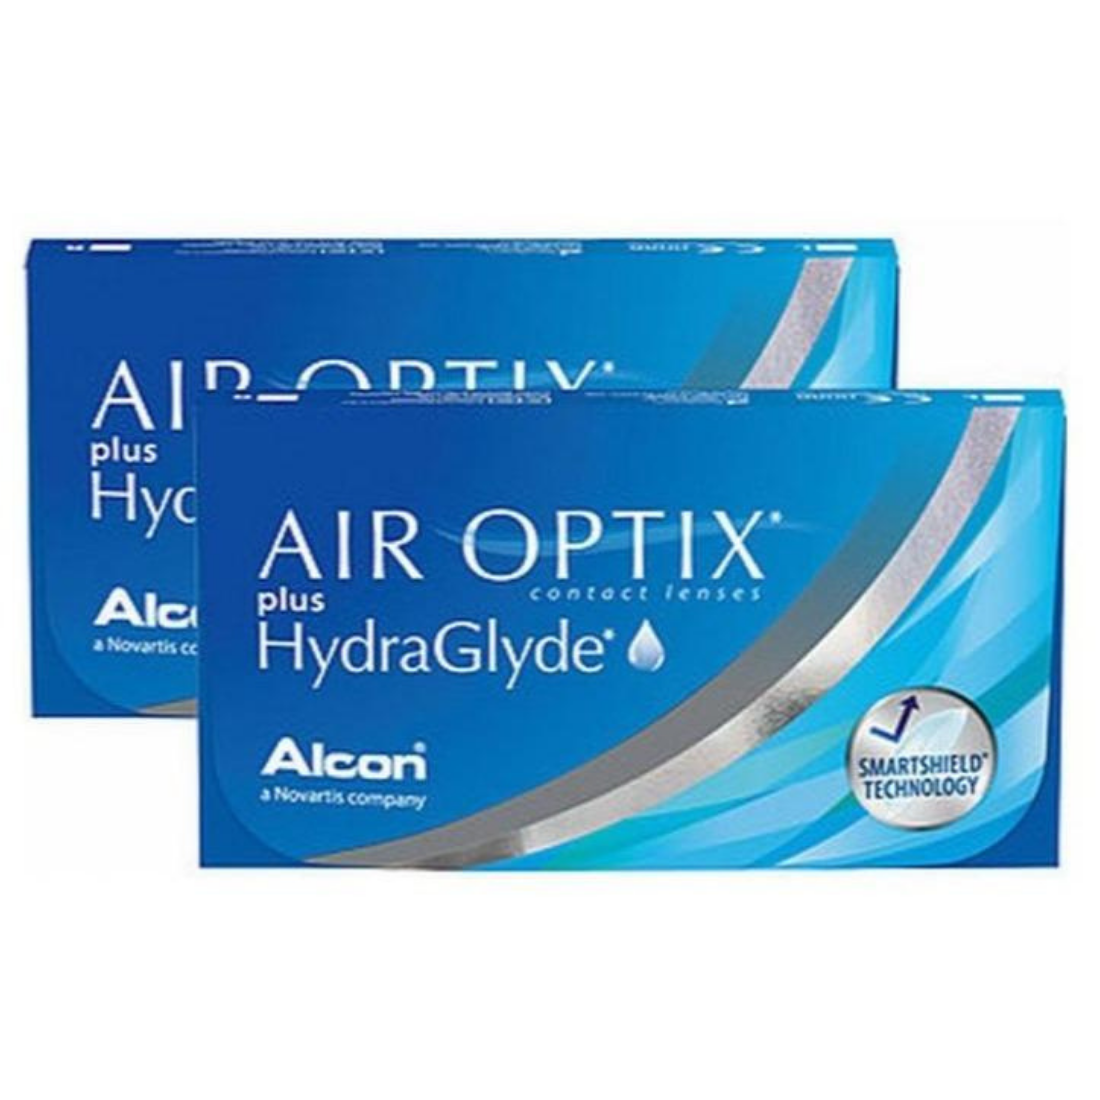 air-optix-plus-hydraglyde-6pk-monthly-contact-lenses-alcon